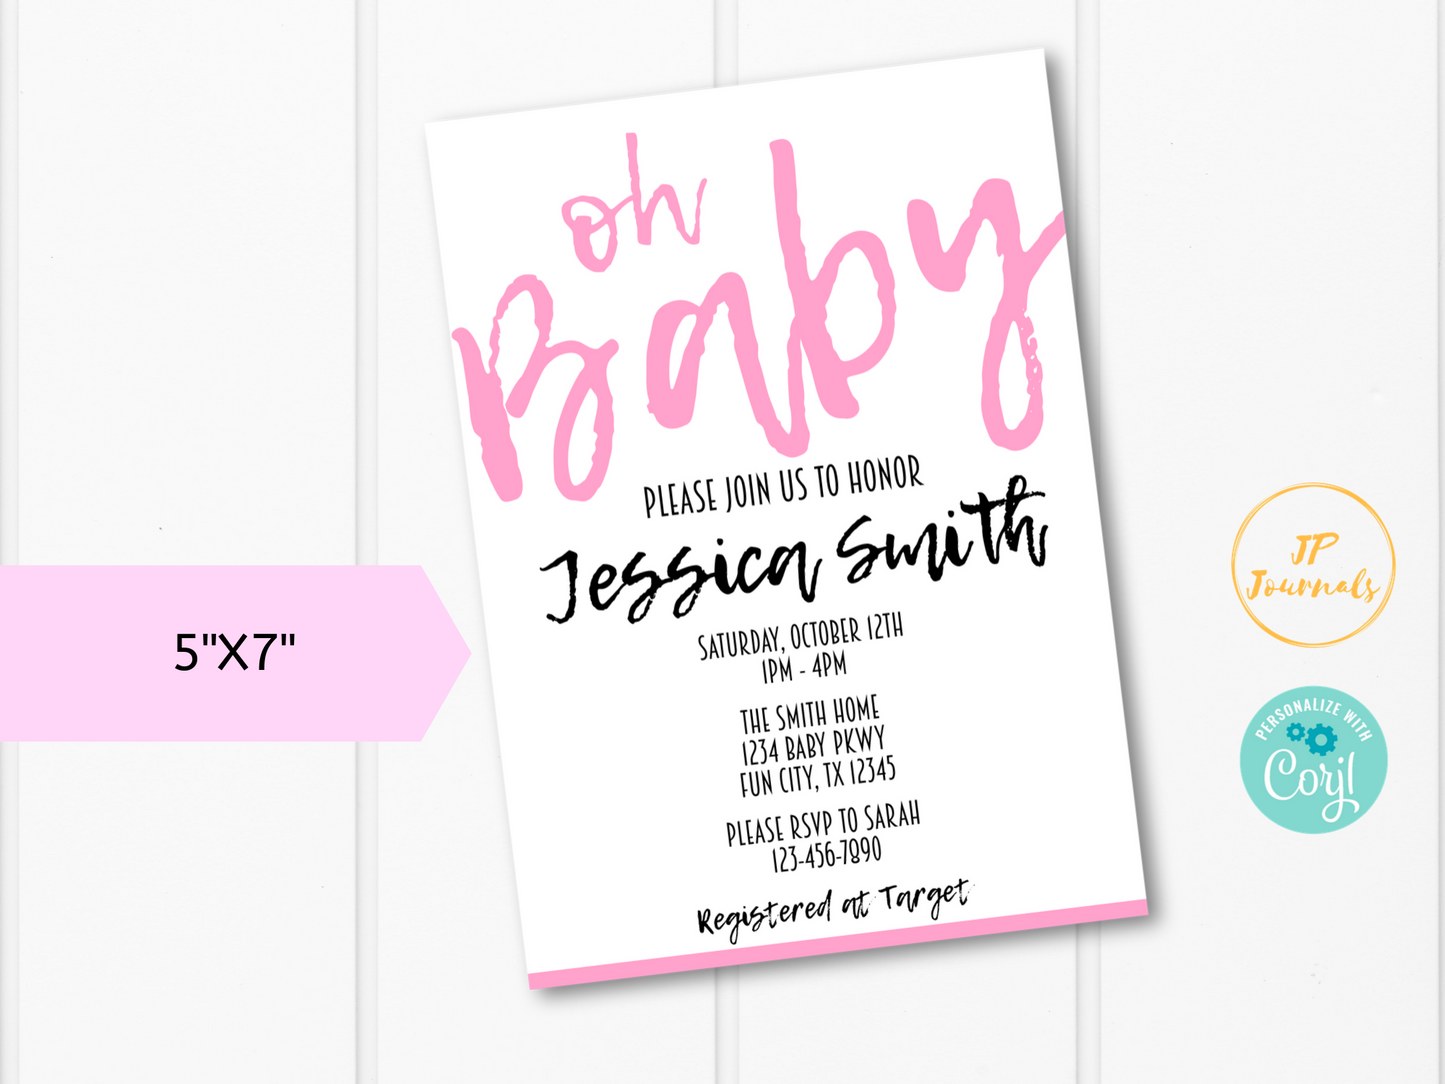 Oh Baby Printable Baby Shower Invitation Template - Simple Modern for a Girl